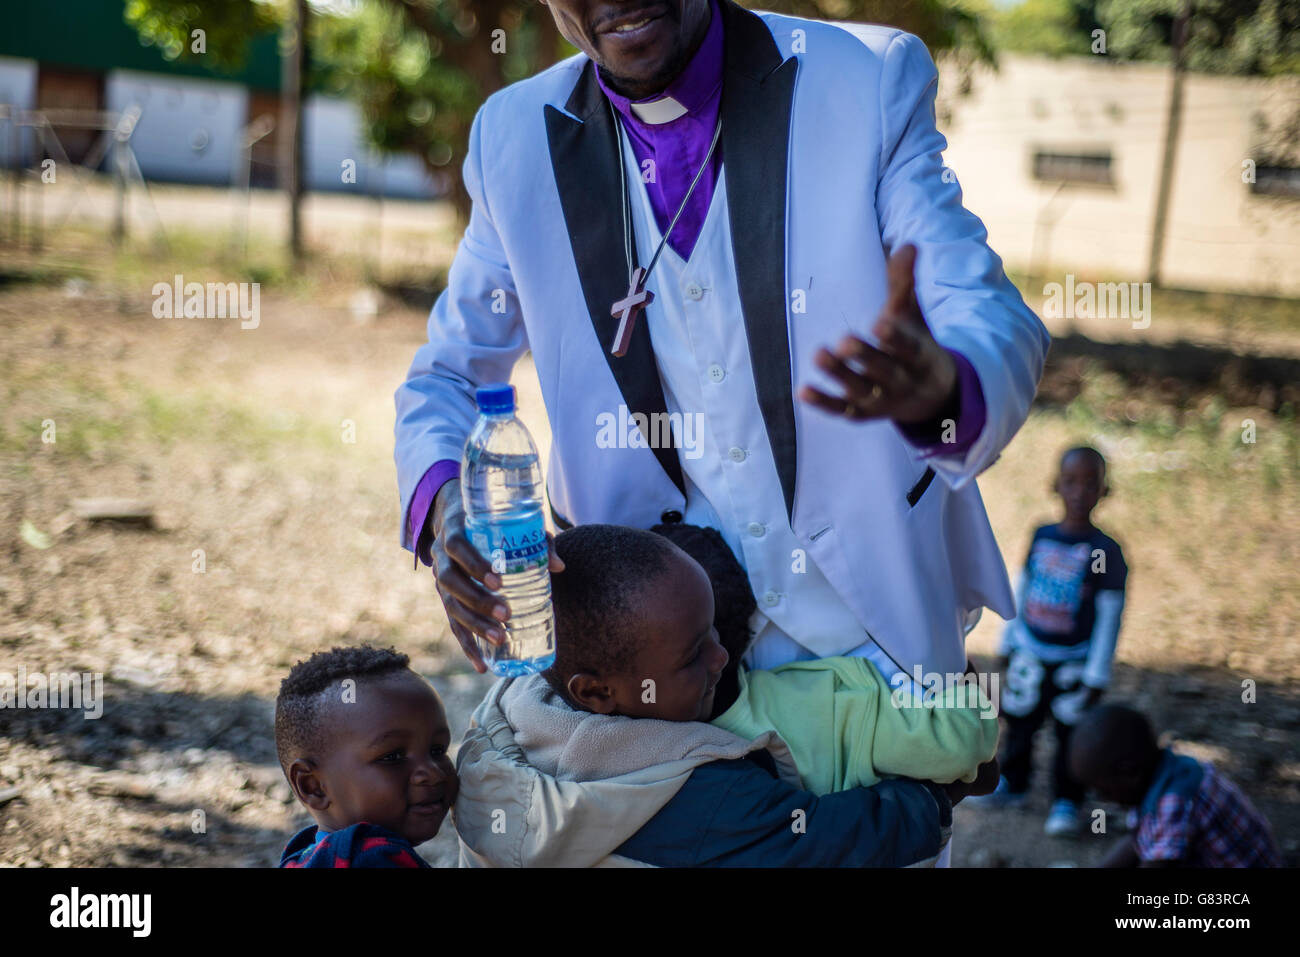 Prophet Chibwe Katebe, founder and pastor of the House of Prayer for All Nations in Zambia, Botswana and Malawi. Stock Photo